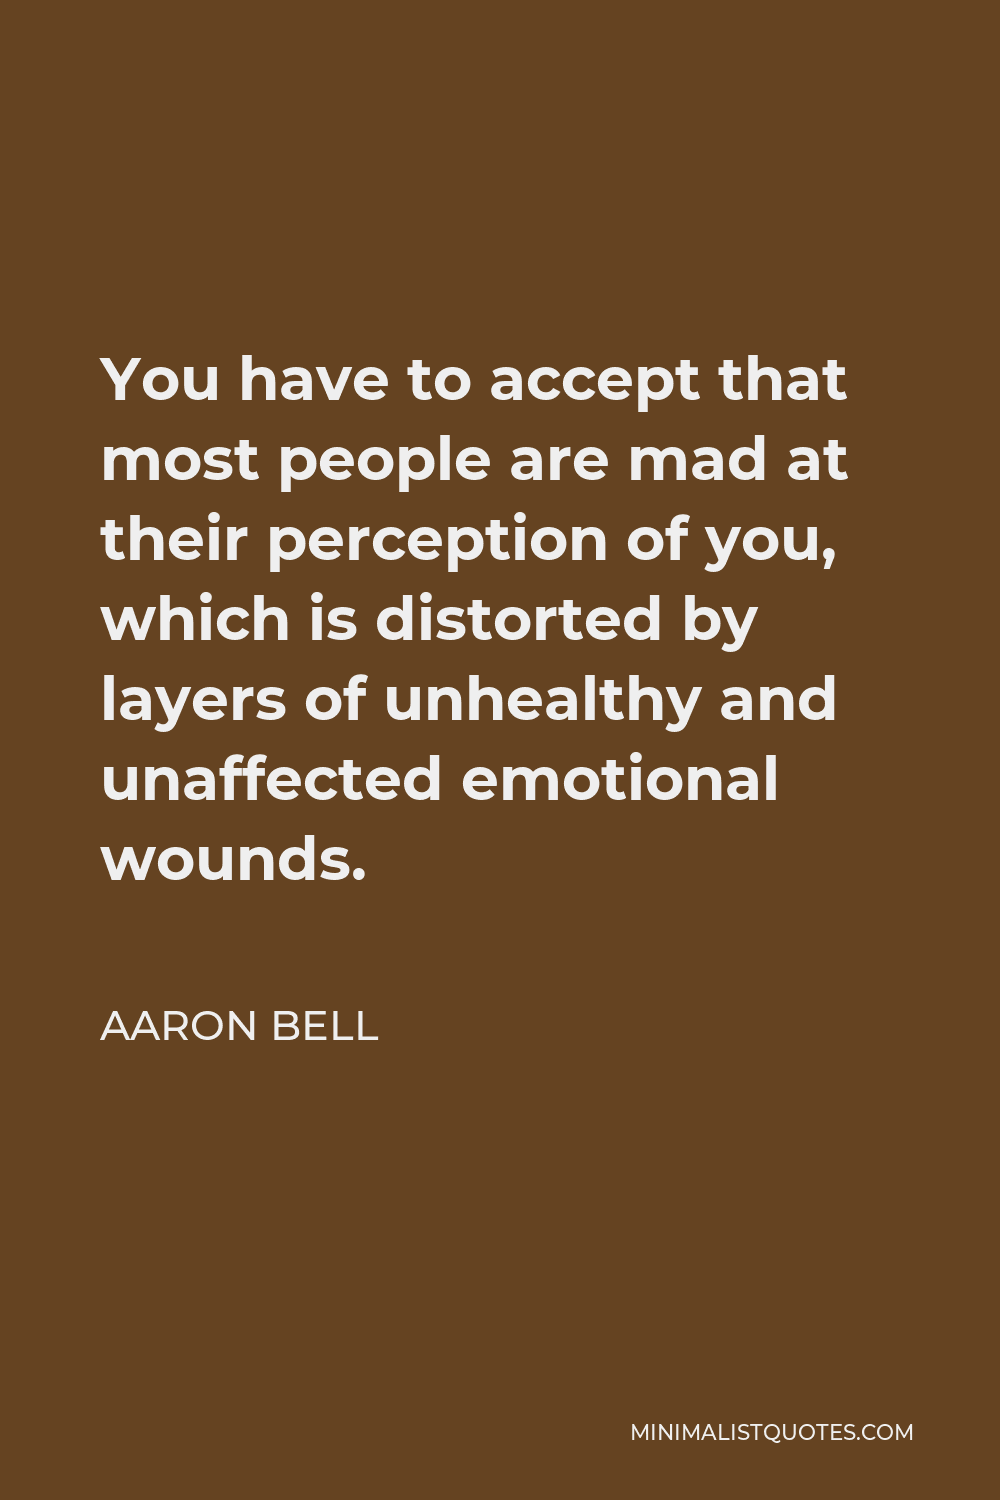 Aaron Bell Quote - You have to accept that most people are mad at their perception of you, which is distorted by layers of unhealthy and unaffected emotional wounds.